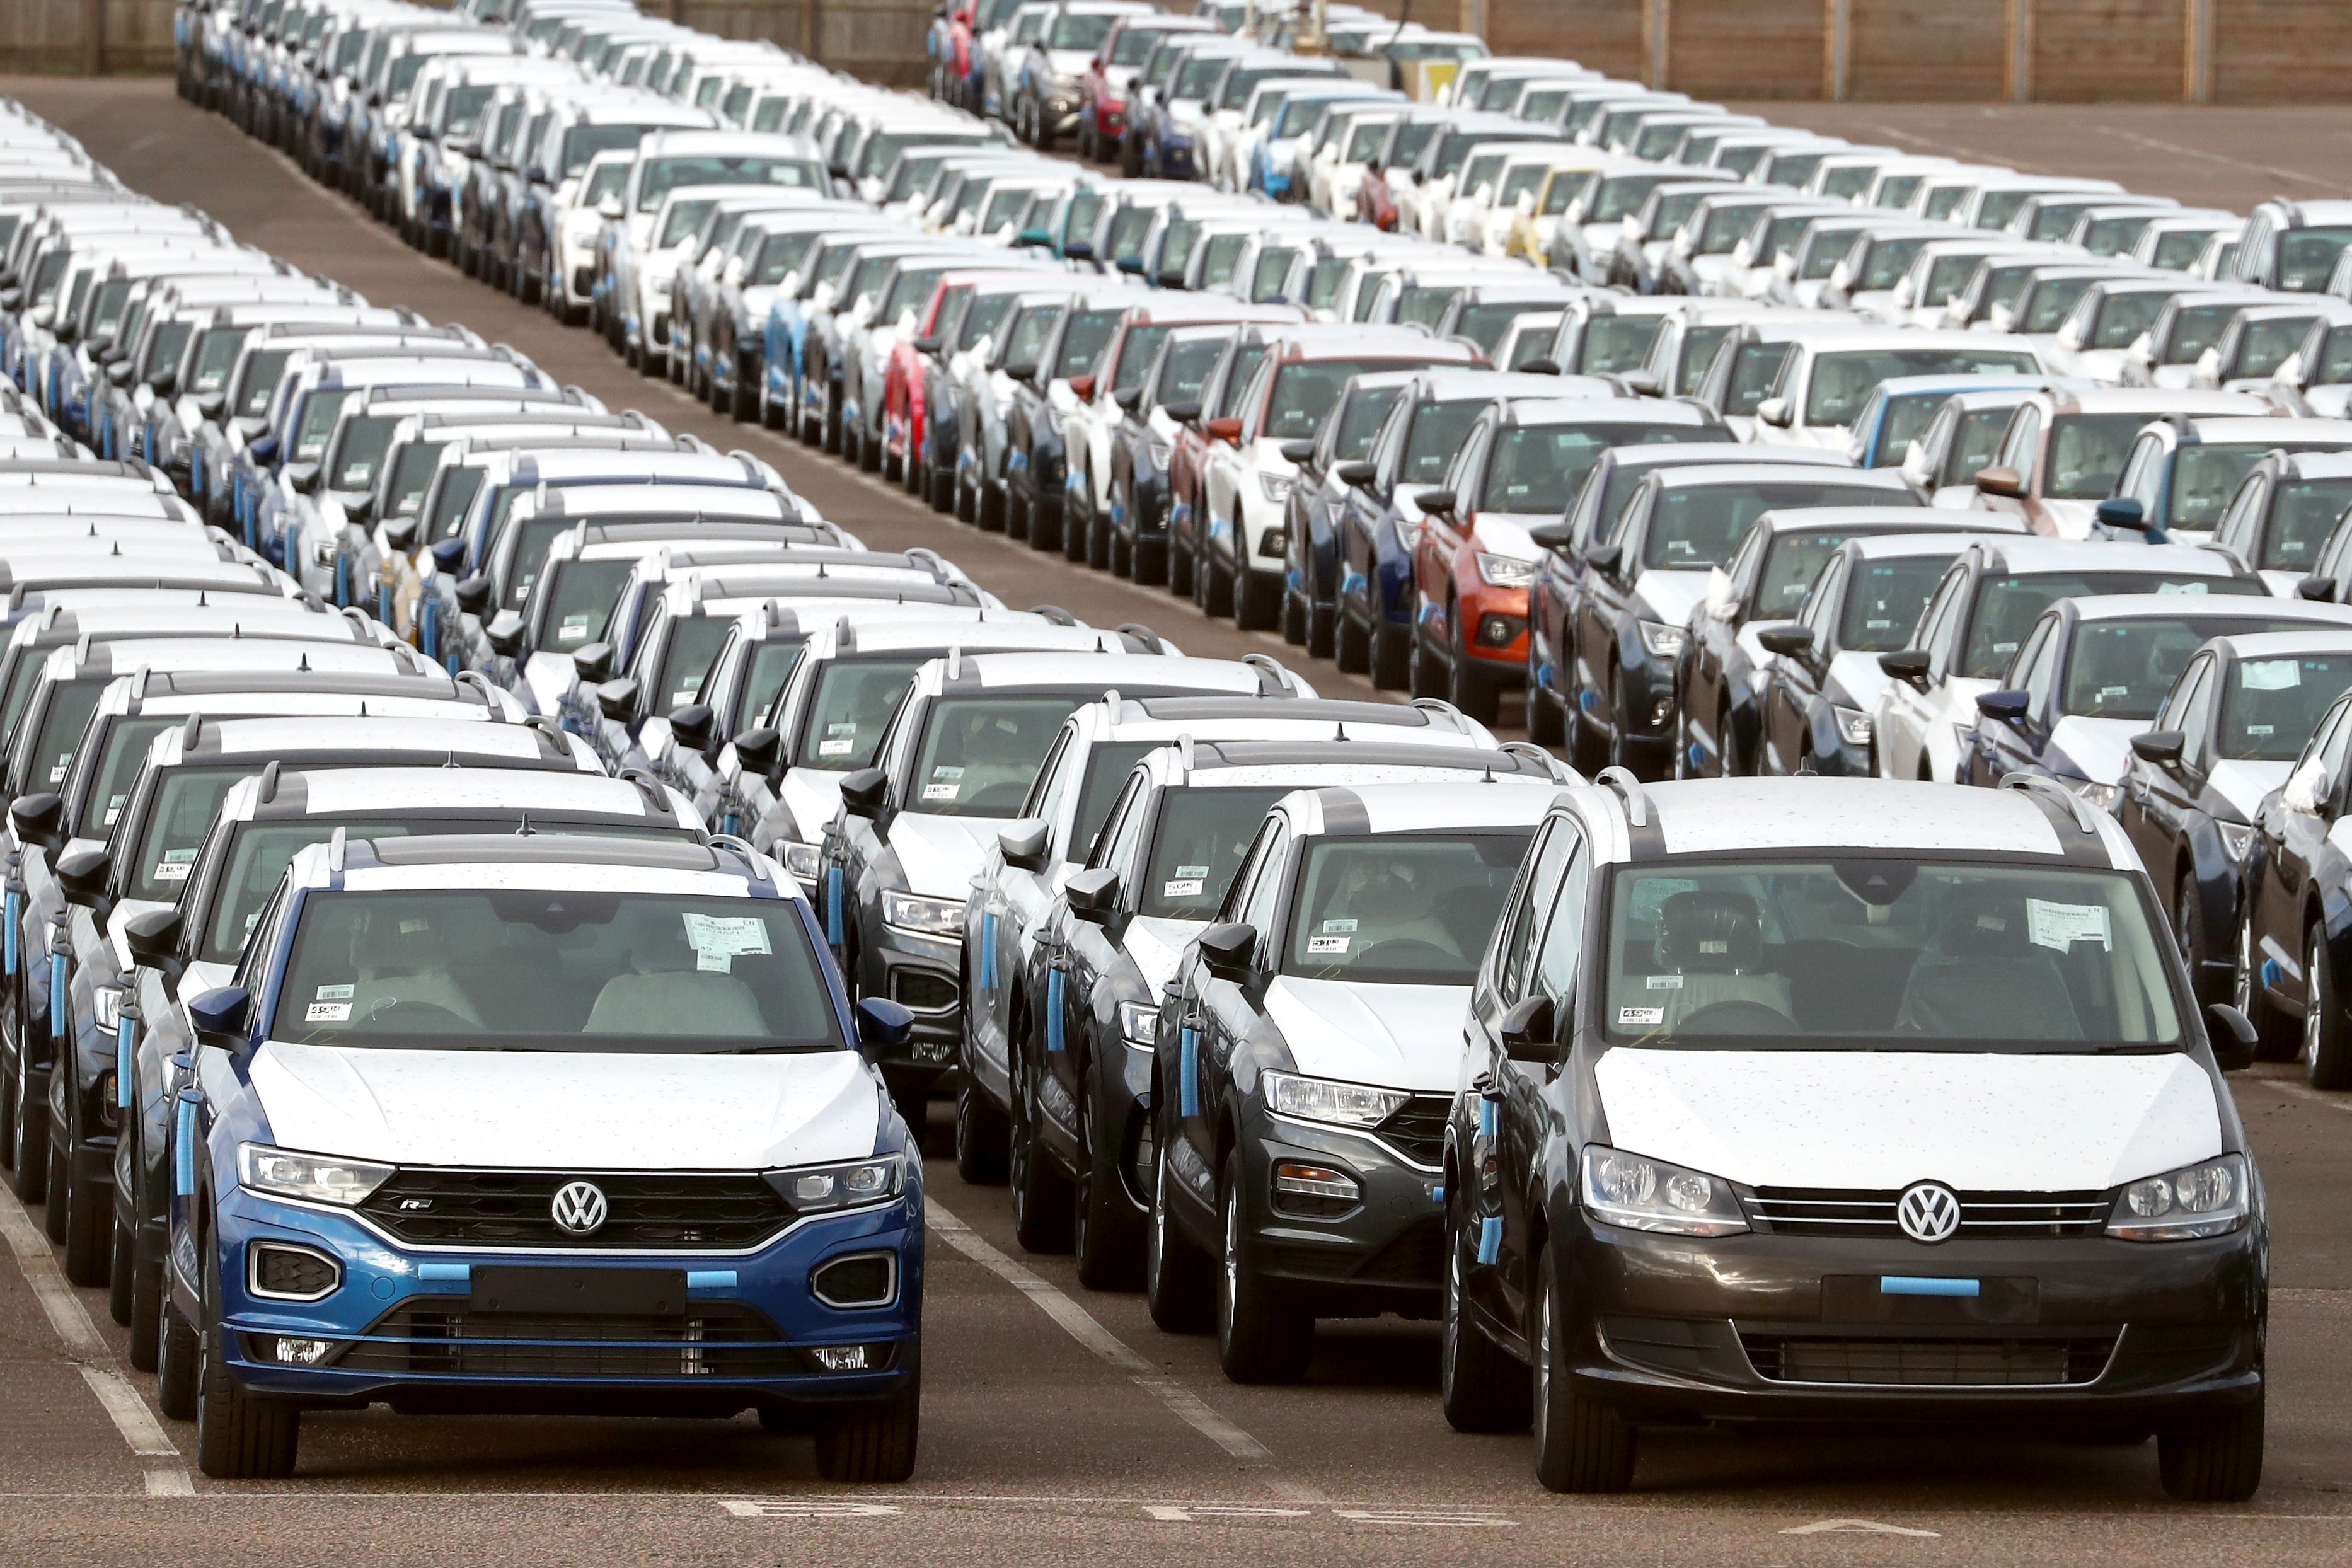 The SMMT said 67,625 new cars were registered by private consumers in June (Gareth Fuller/PA)